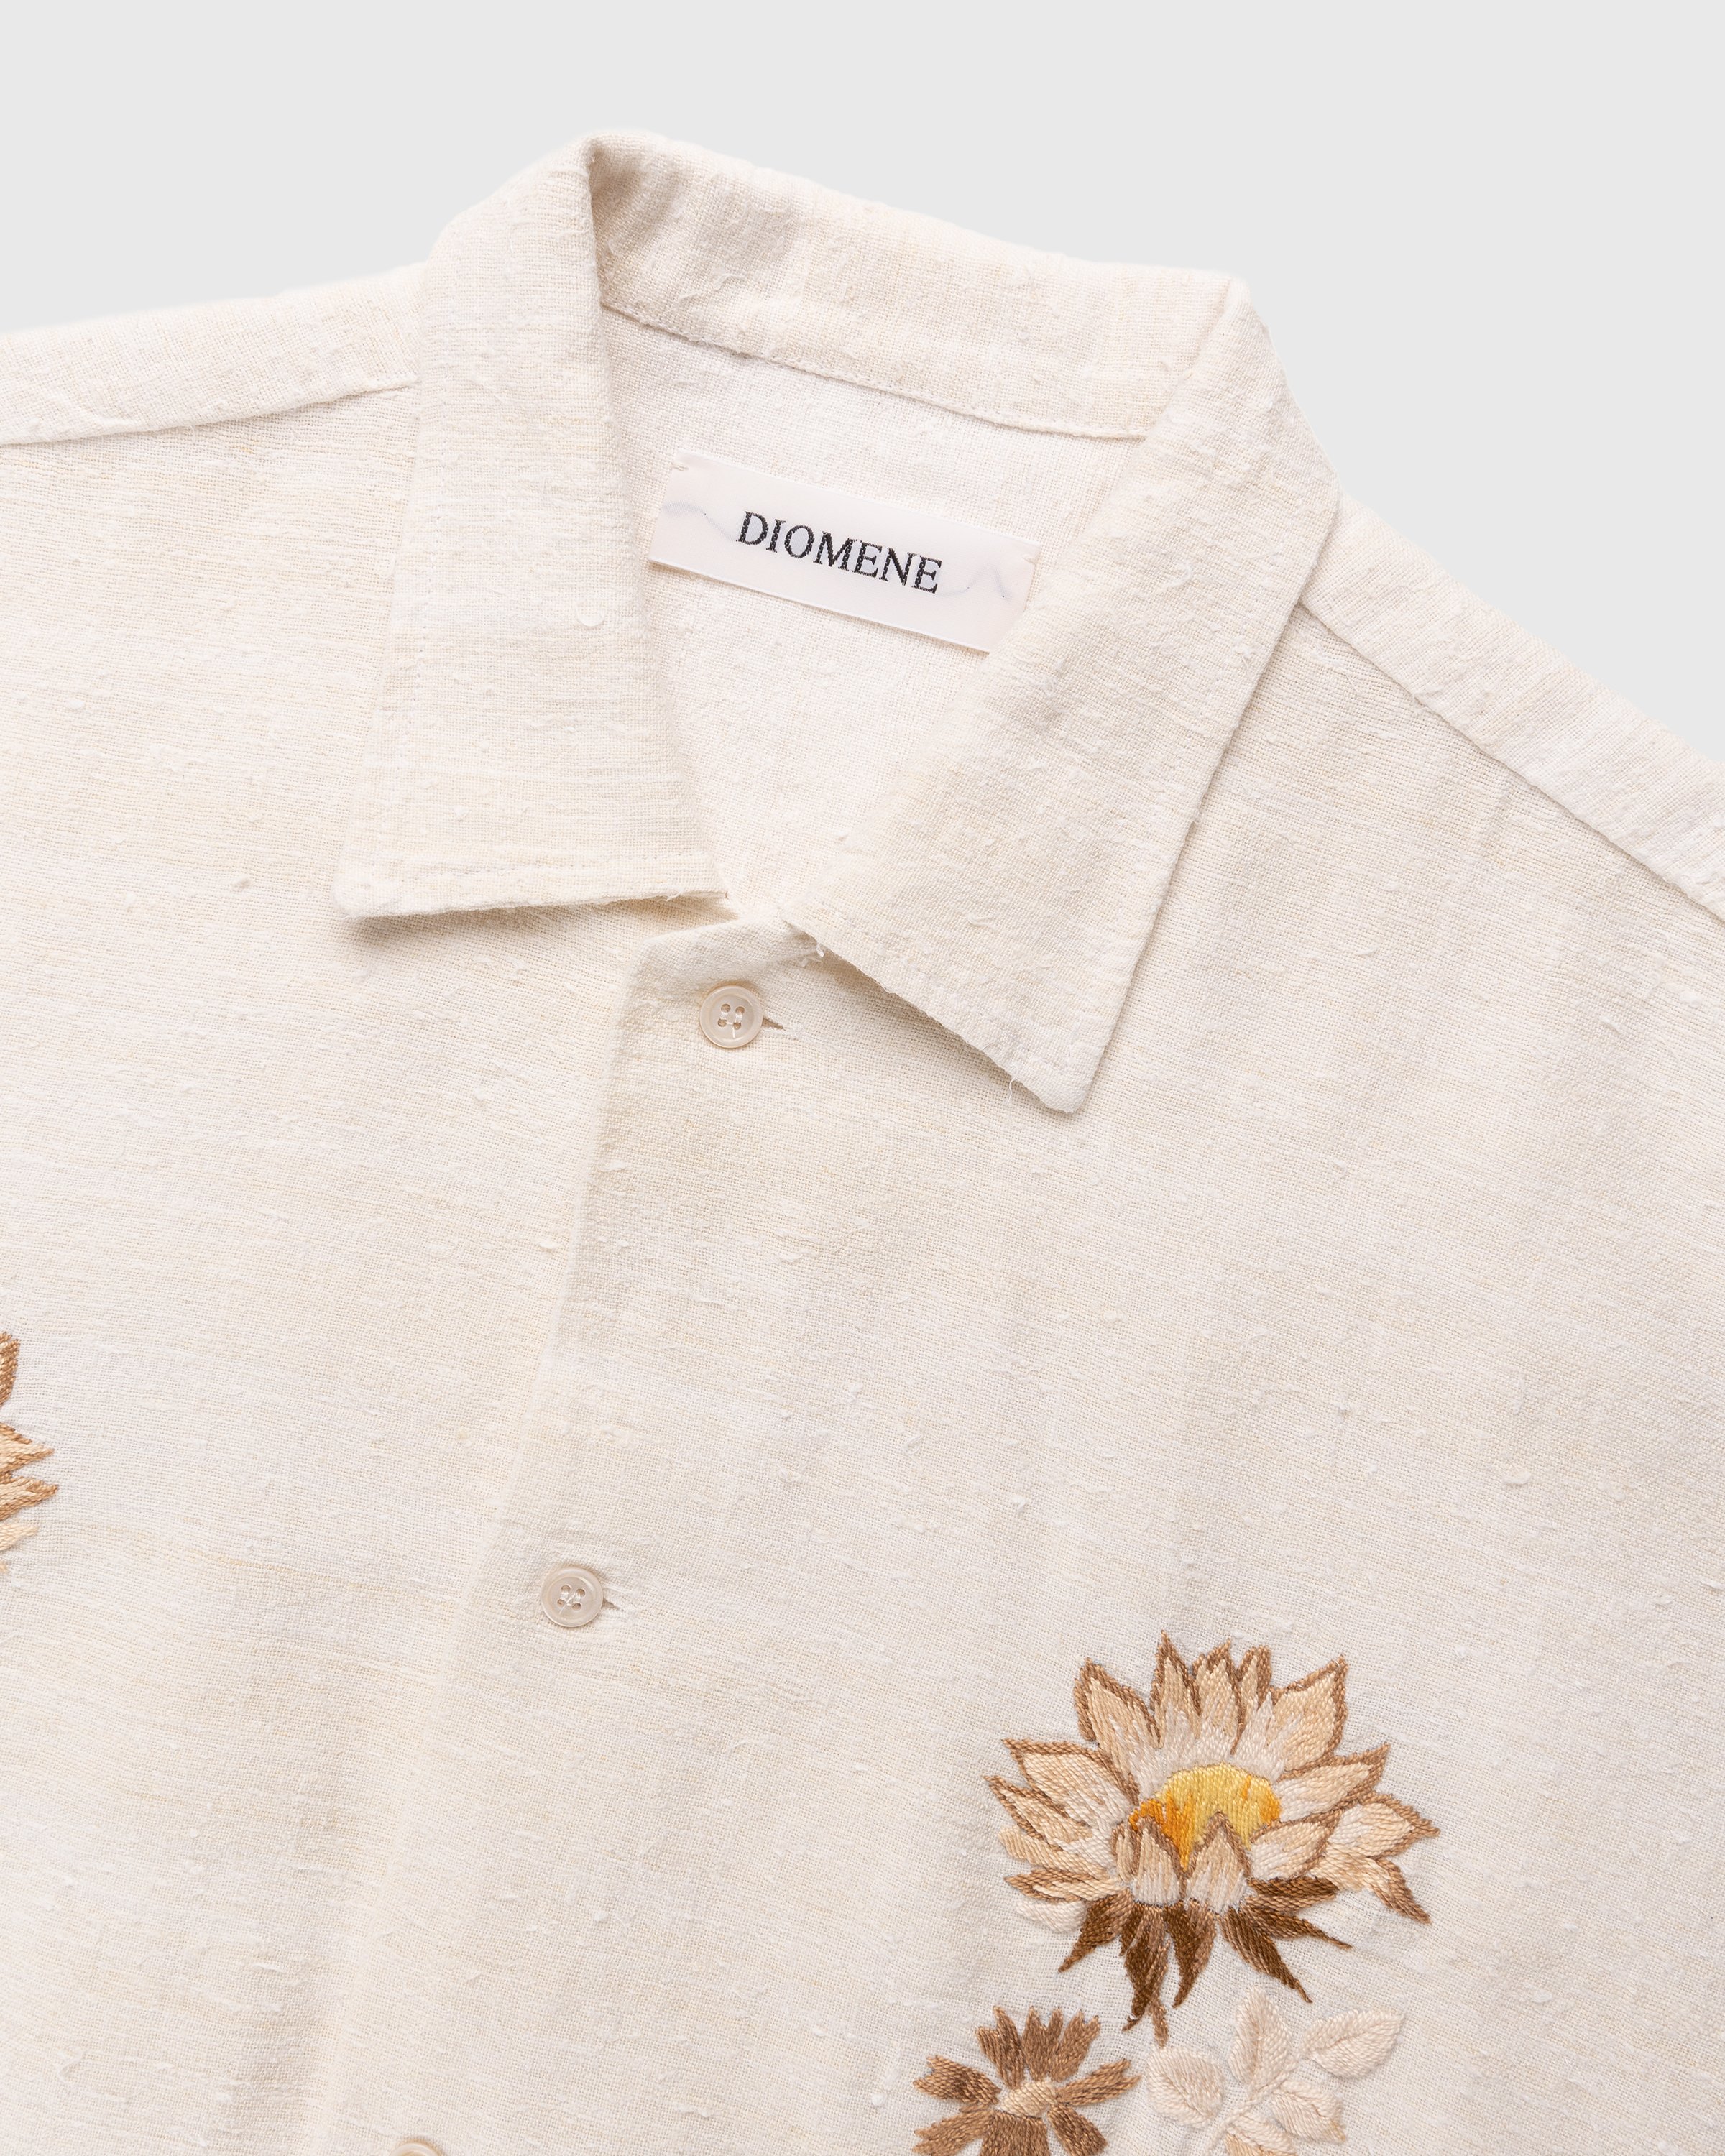 Diomene by Damir Doma - Embroidered Vacation Shirt Cream - Clothing - White - Image 4